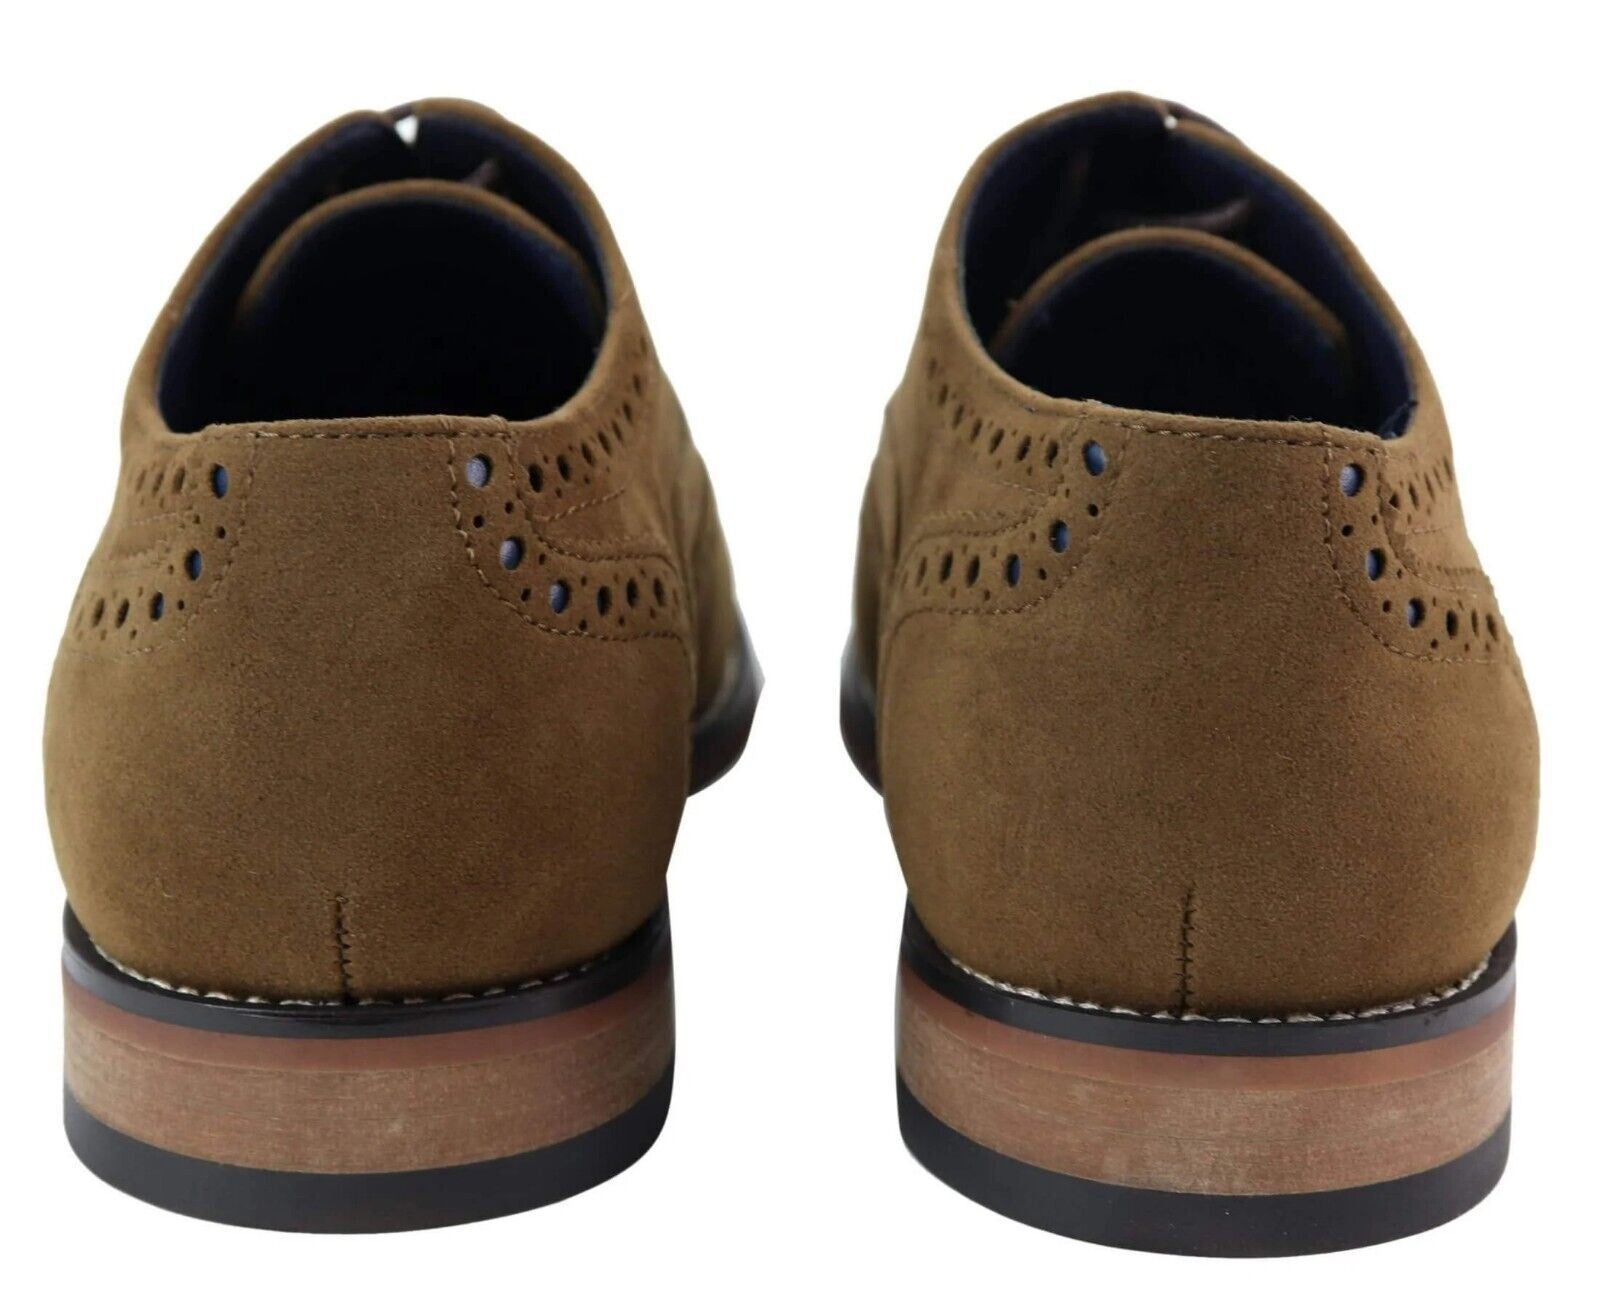 Mens Classic Oxford Brogue Shoes in Tan/Navy Suede - Upperclass Fashions 